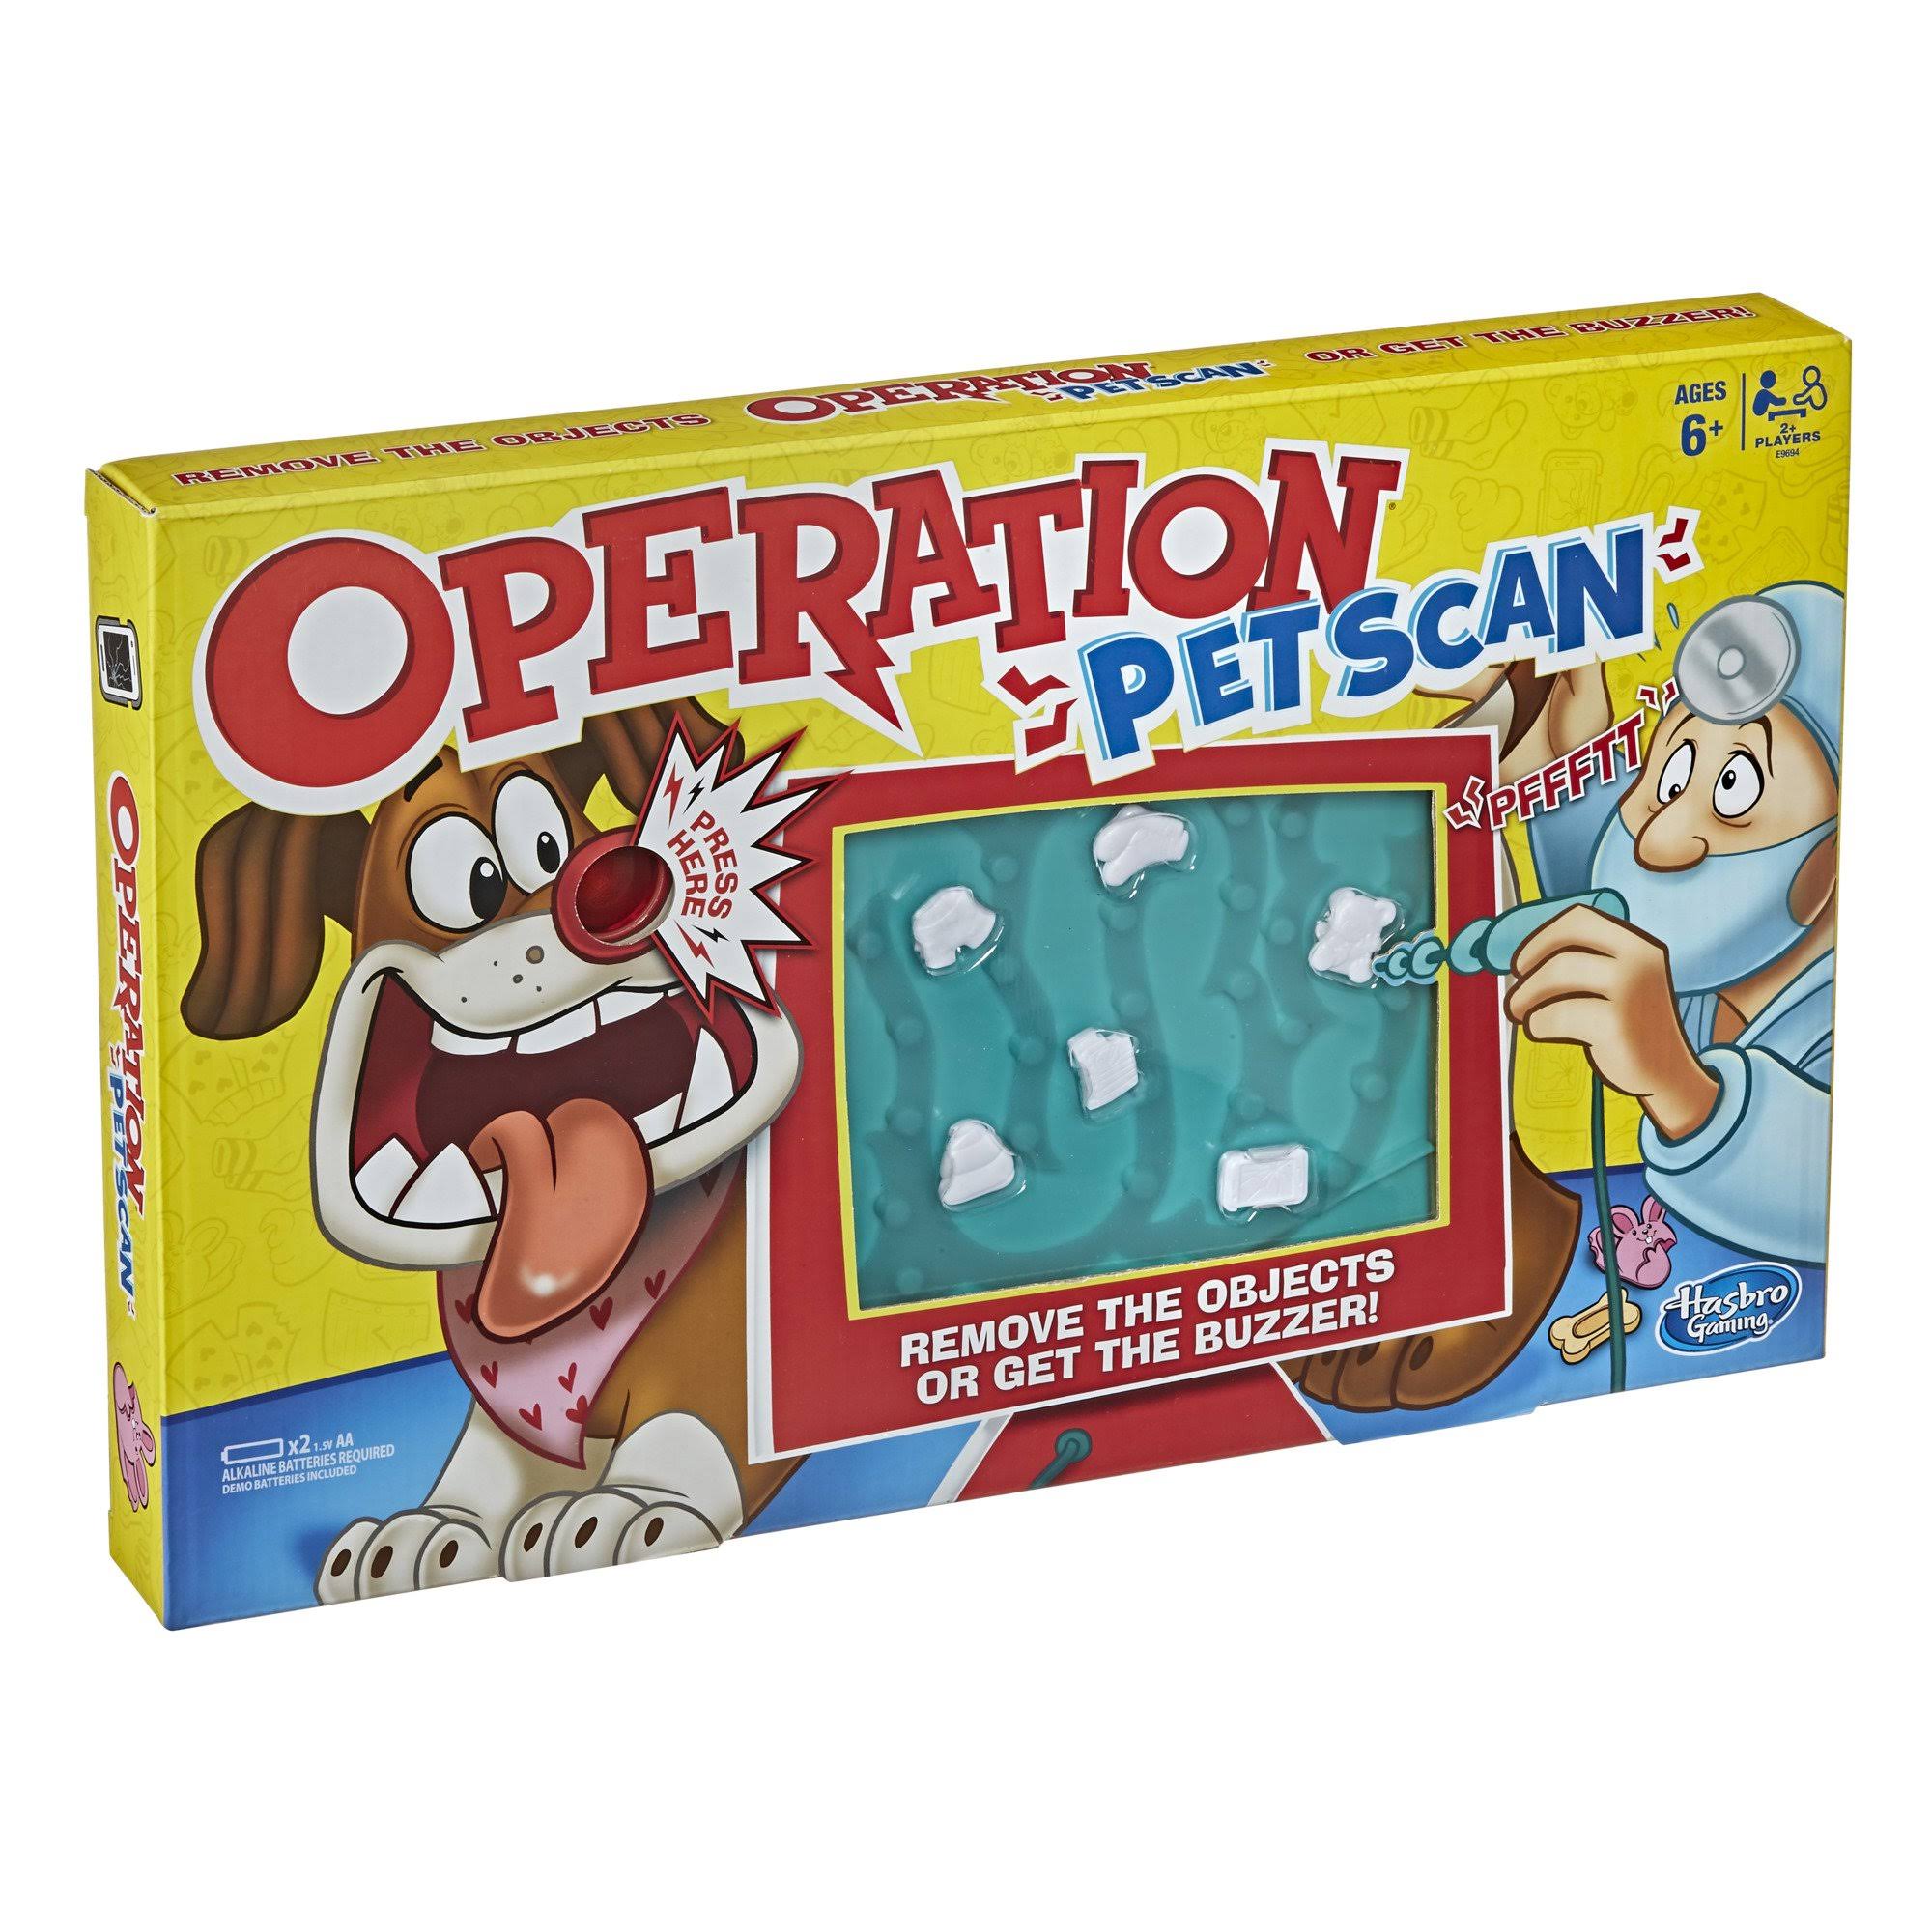 Hasbro Gaming Game, Operation Pet Scan, Ages 6+